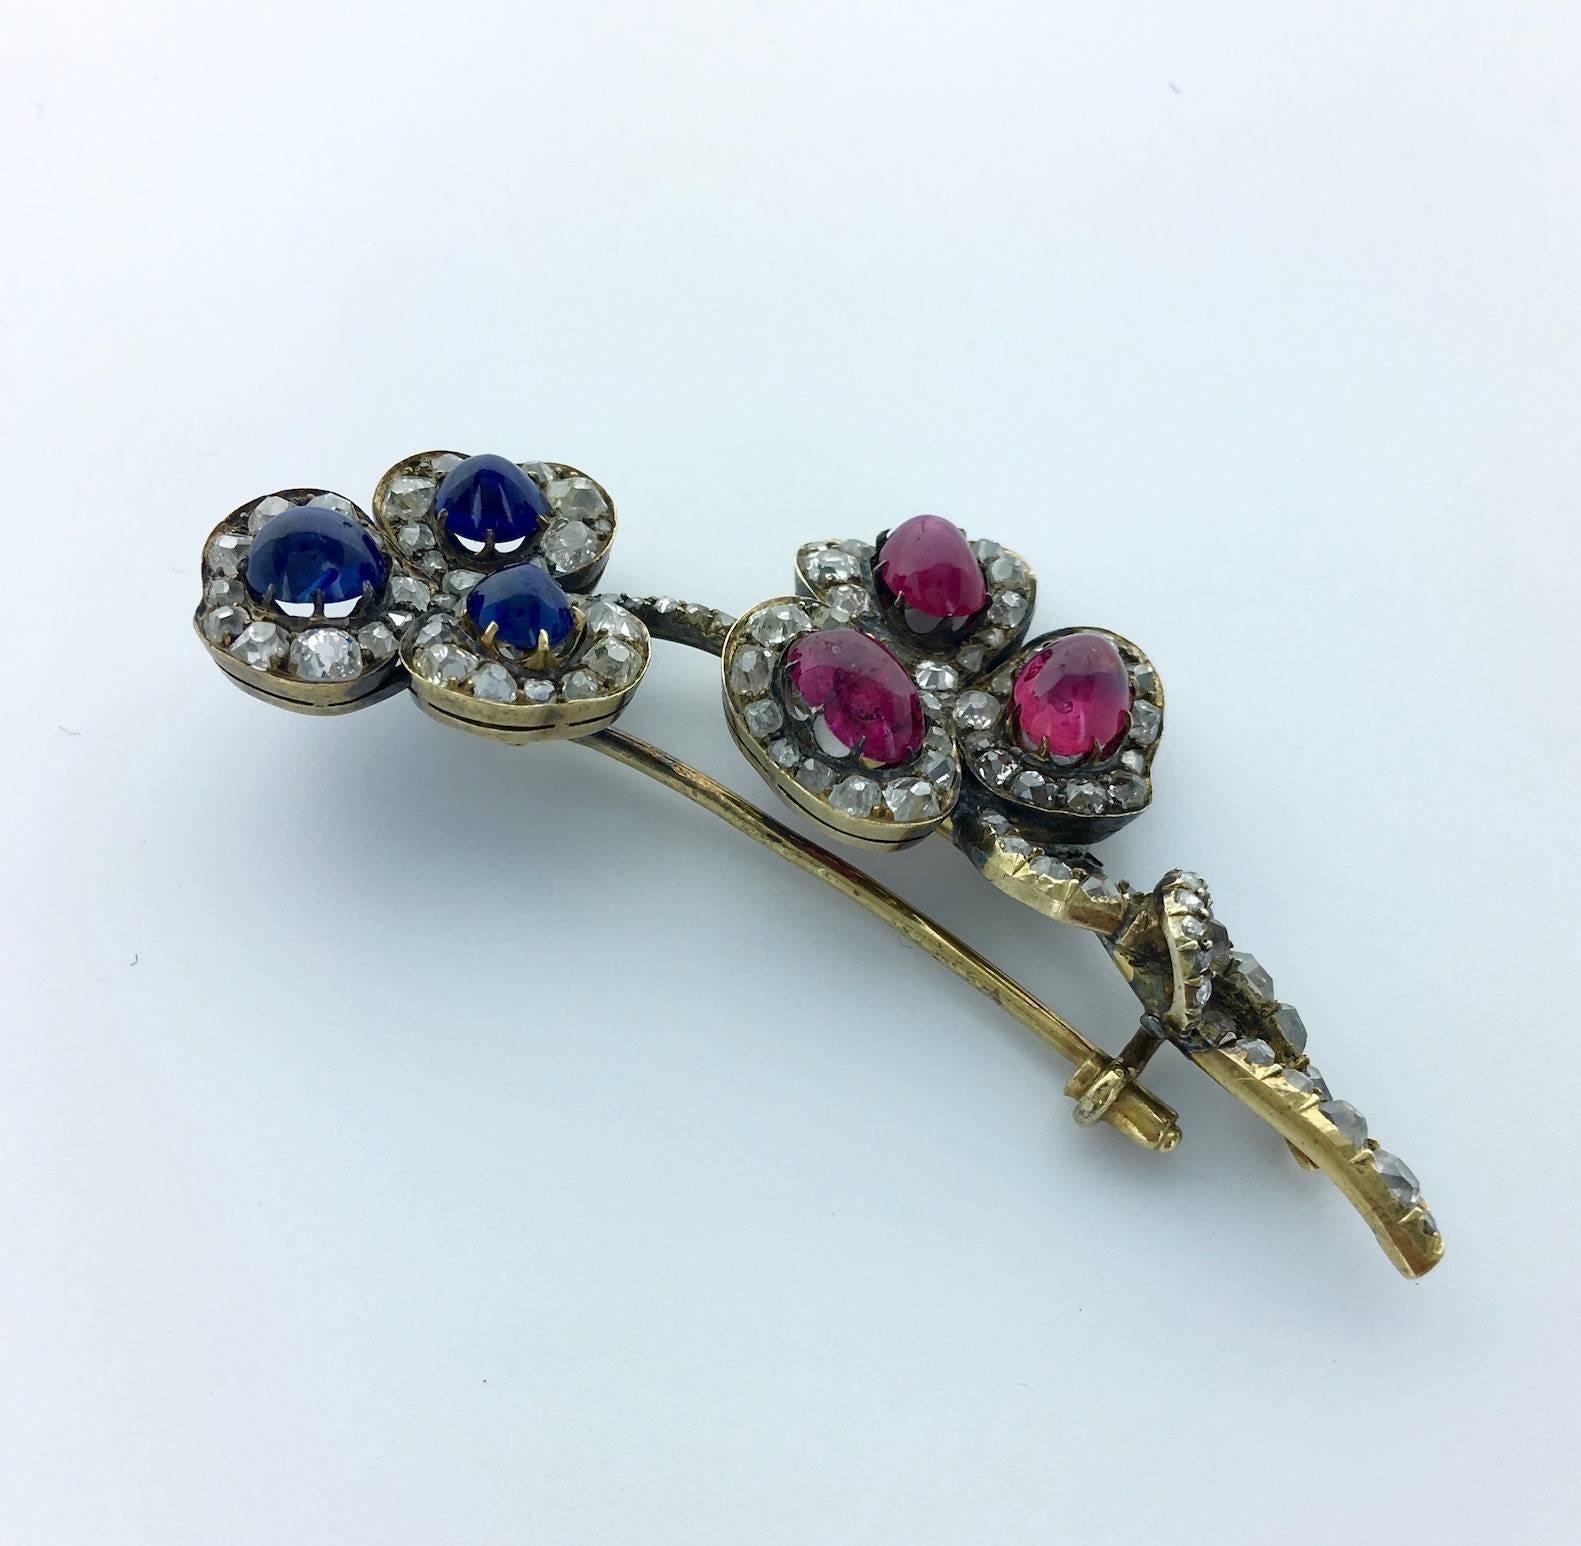 This Clover brooch is Amazing. The cabochon Sapphire and Ruby are Burmese non heated of incredible color and brightness surrounded by Old mine cut Diamond.
French marks and maker's mark (F.K.)
Circa 1890.

Gross weight: 13.11 grams.